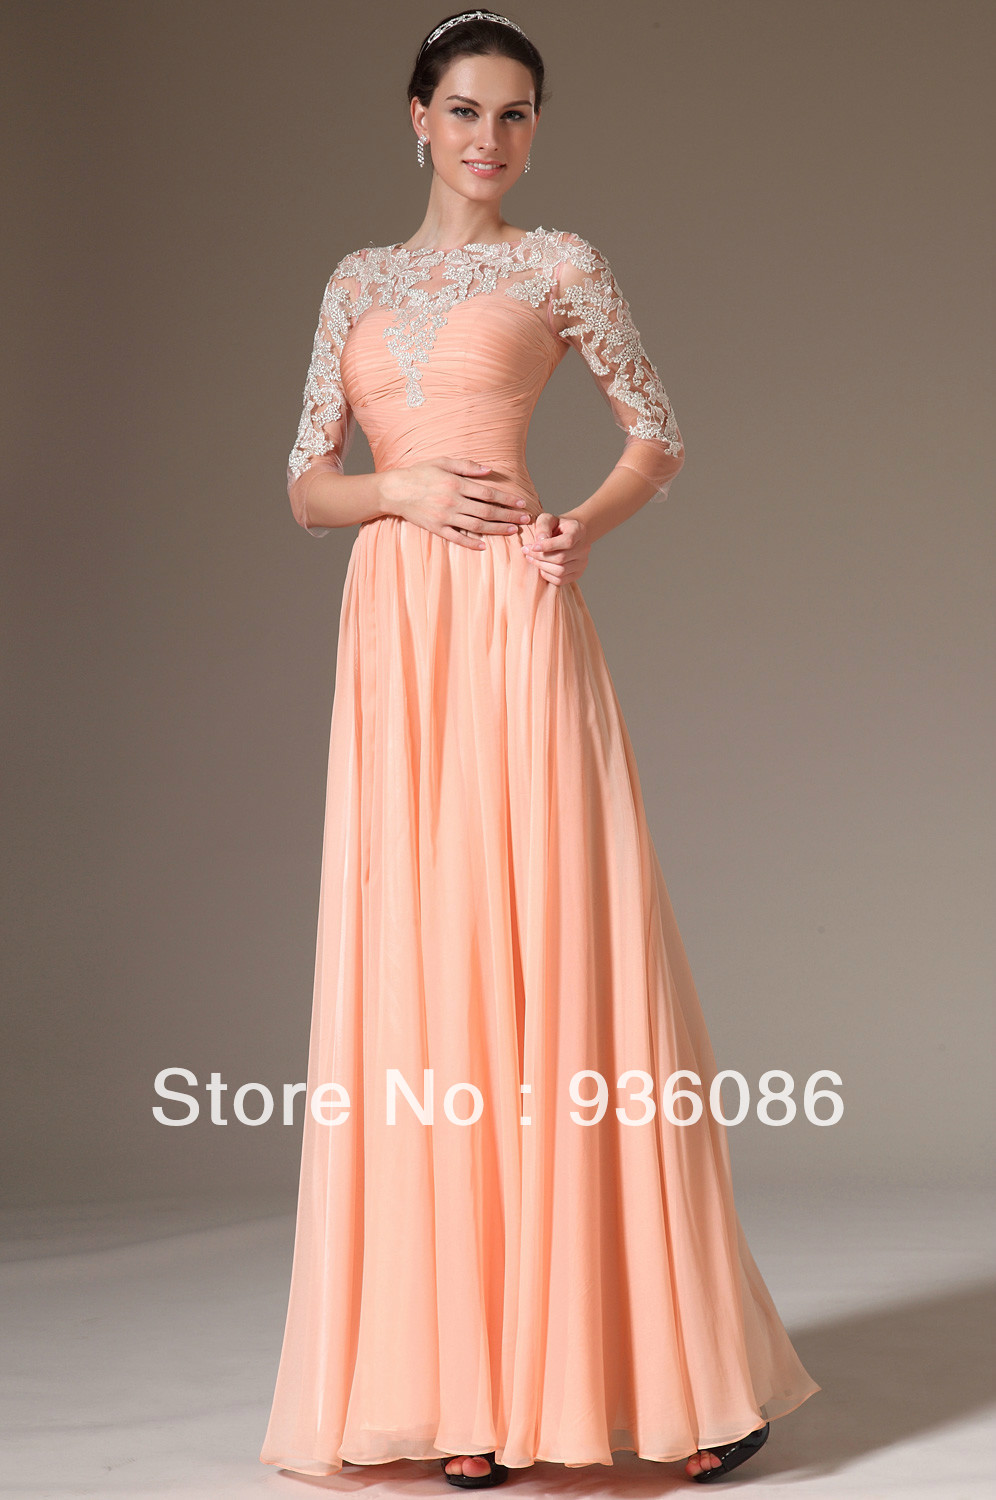 prom dresses for tall girls